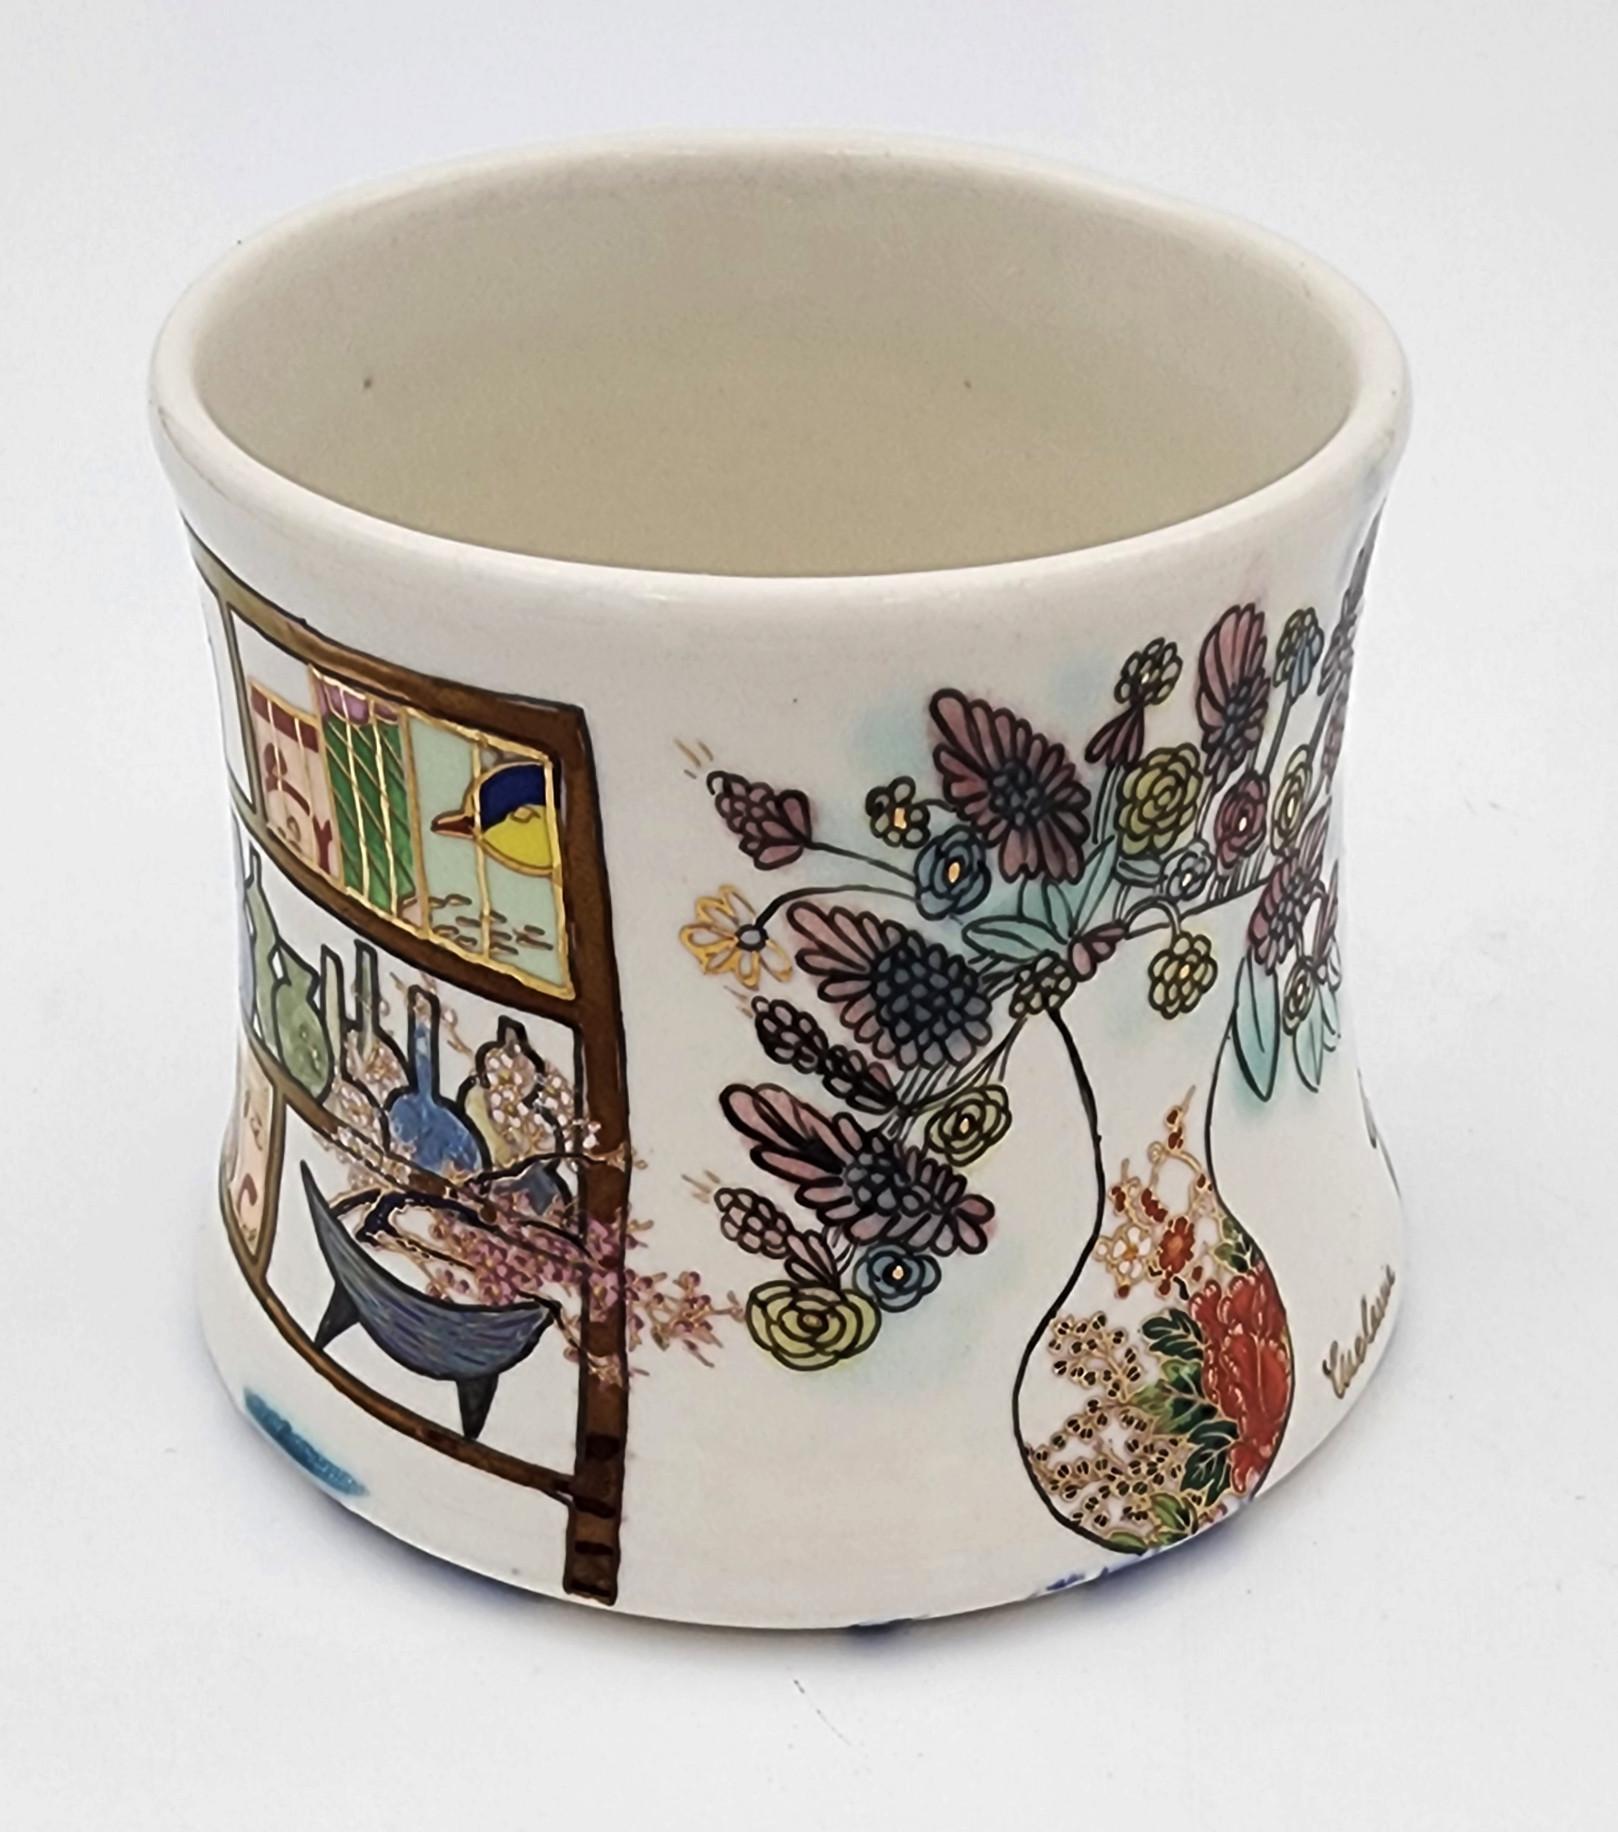 Melanie Sherman
Cup with Interior III (Hand-Painted, Gold Luster, Vase, Flowers, Bookcase)
Porcelaneous Stoneware, Underglaze, Glaze, Porcelain Paint, Hand-made Vintage Decals, Gold Luster, Platinum Luster
Year: 2023
Size: 2.5x3.5x3.5in
Signed by